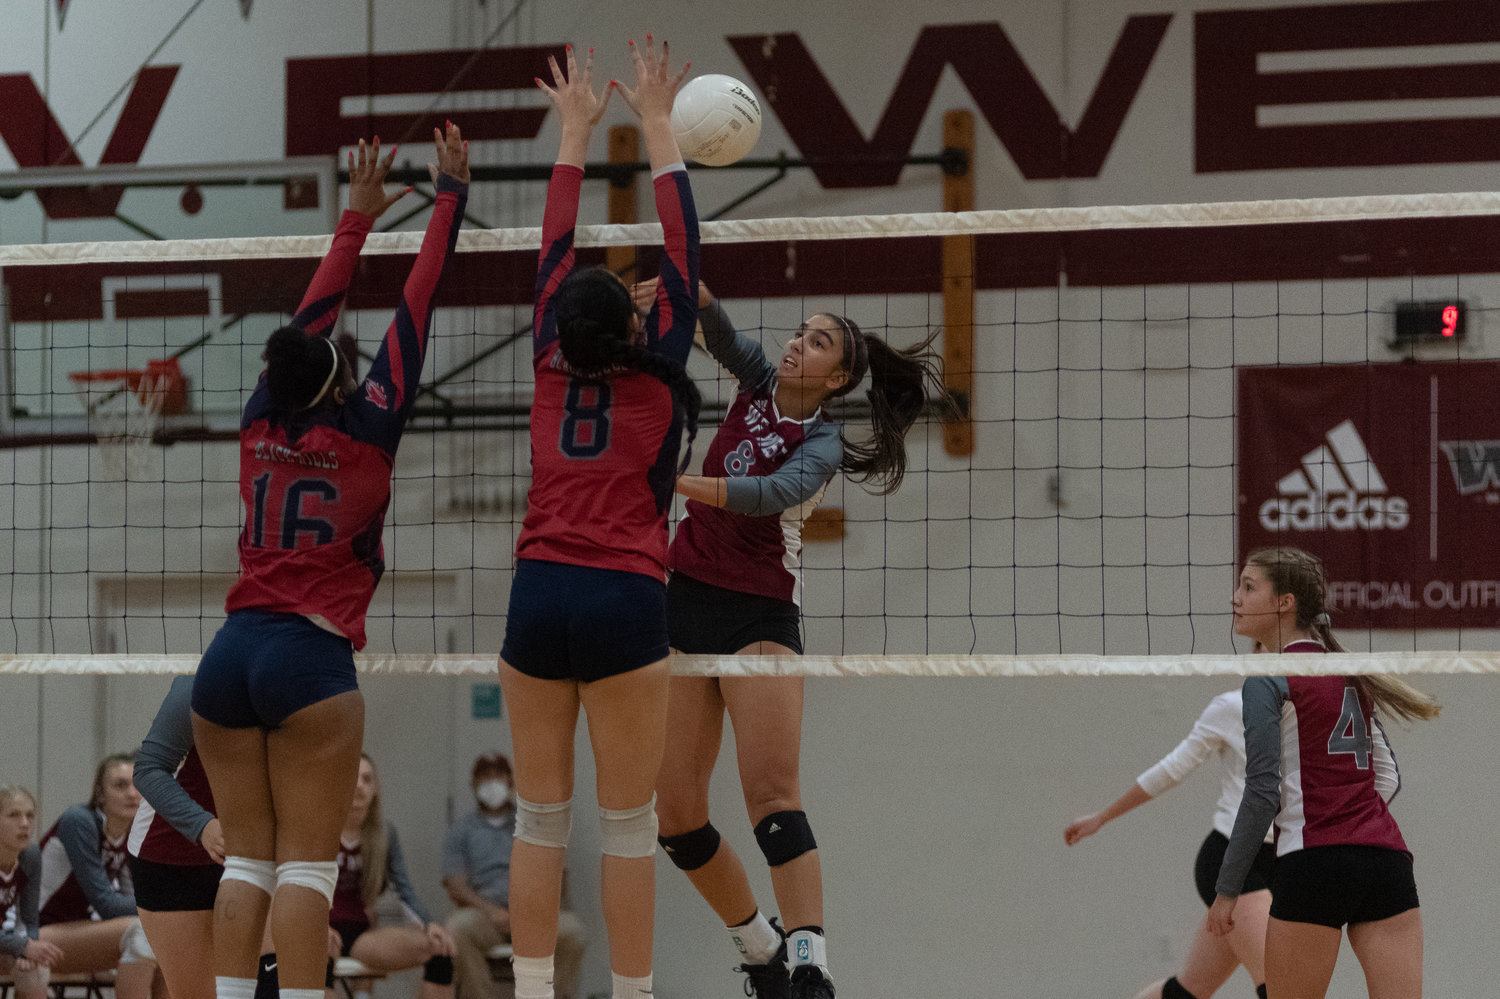 W.F. West senior Anna White aims a spike across the net against Black Hills Oct. 21.